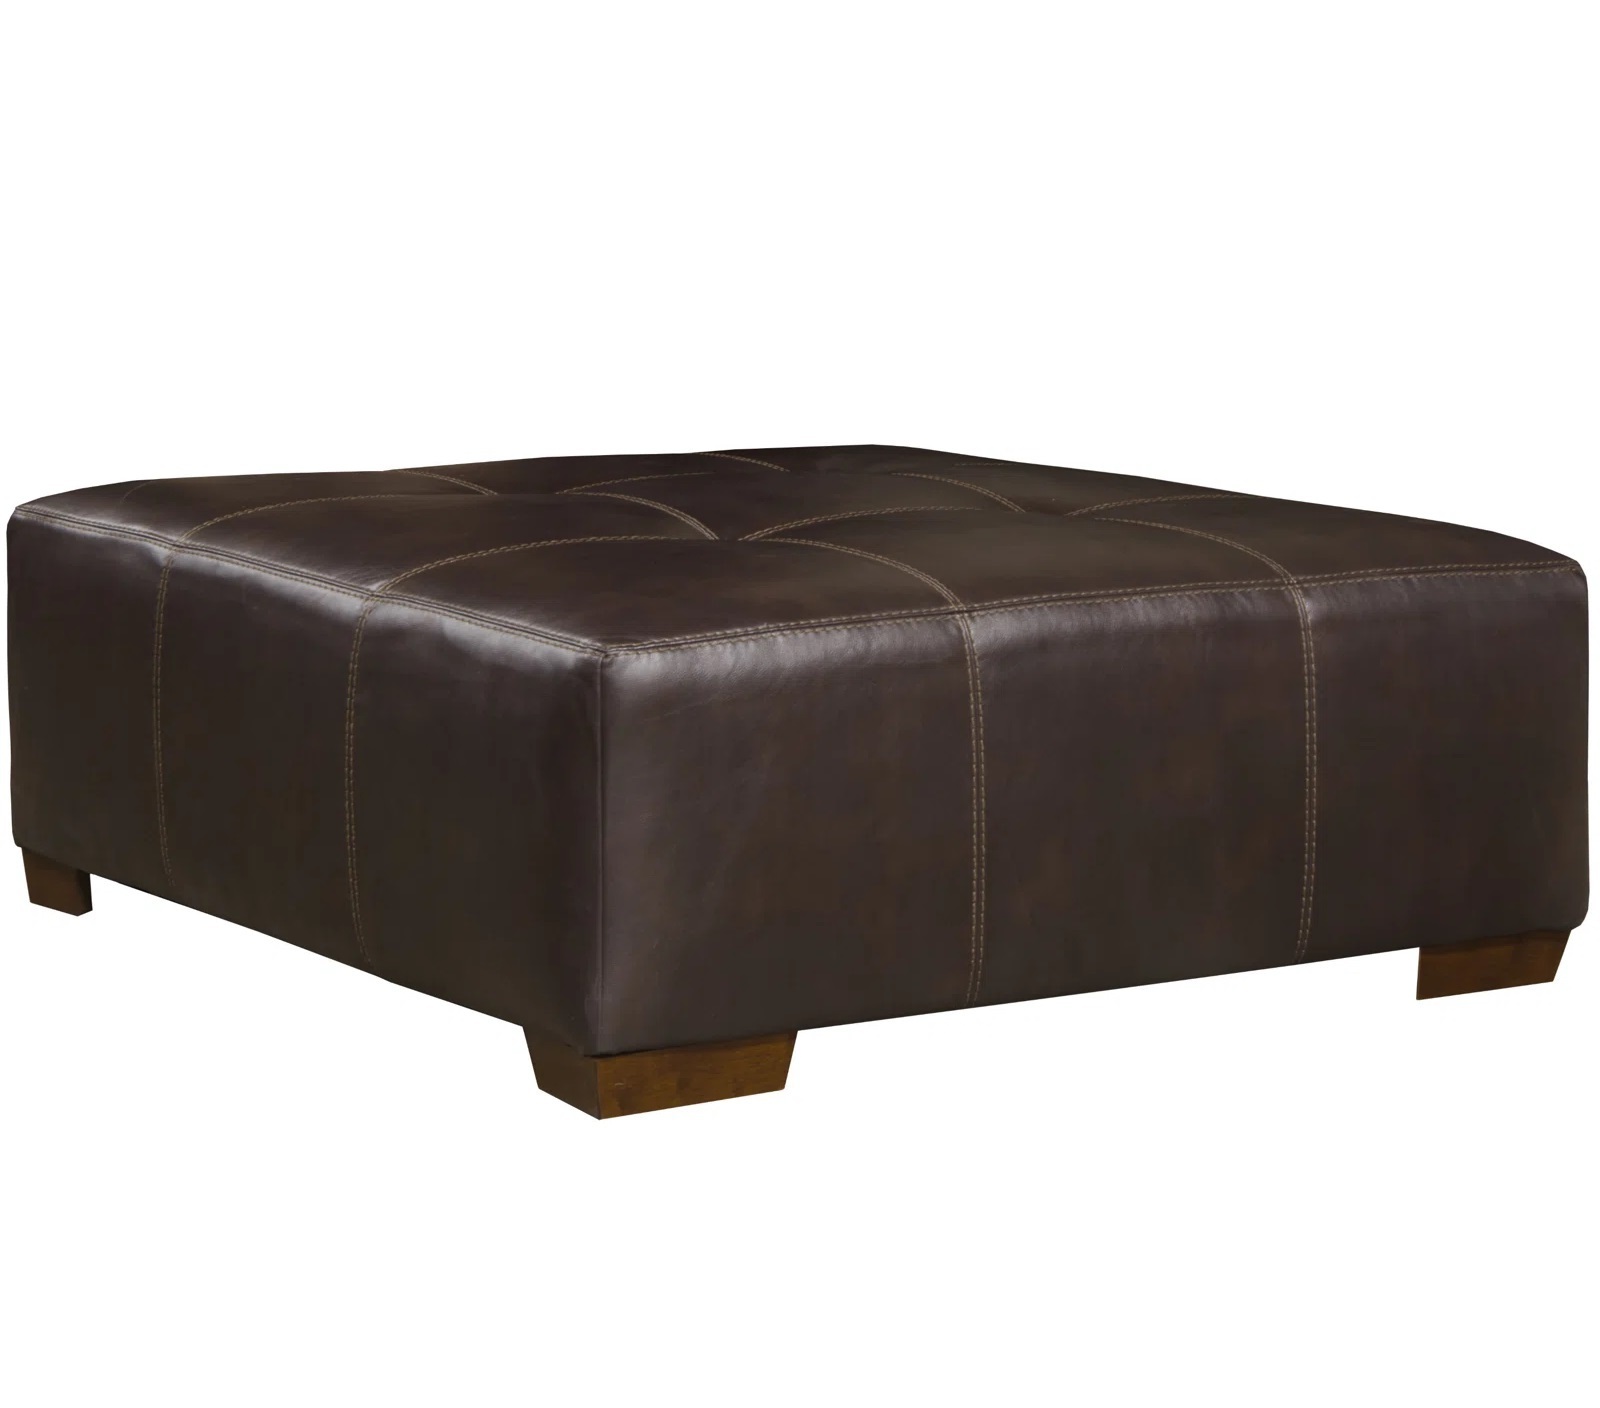 Classic Extra Large Square Ottoman